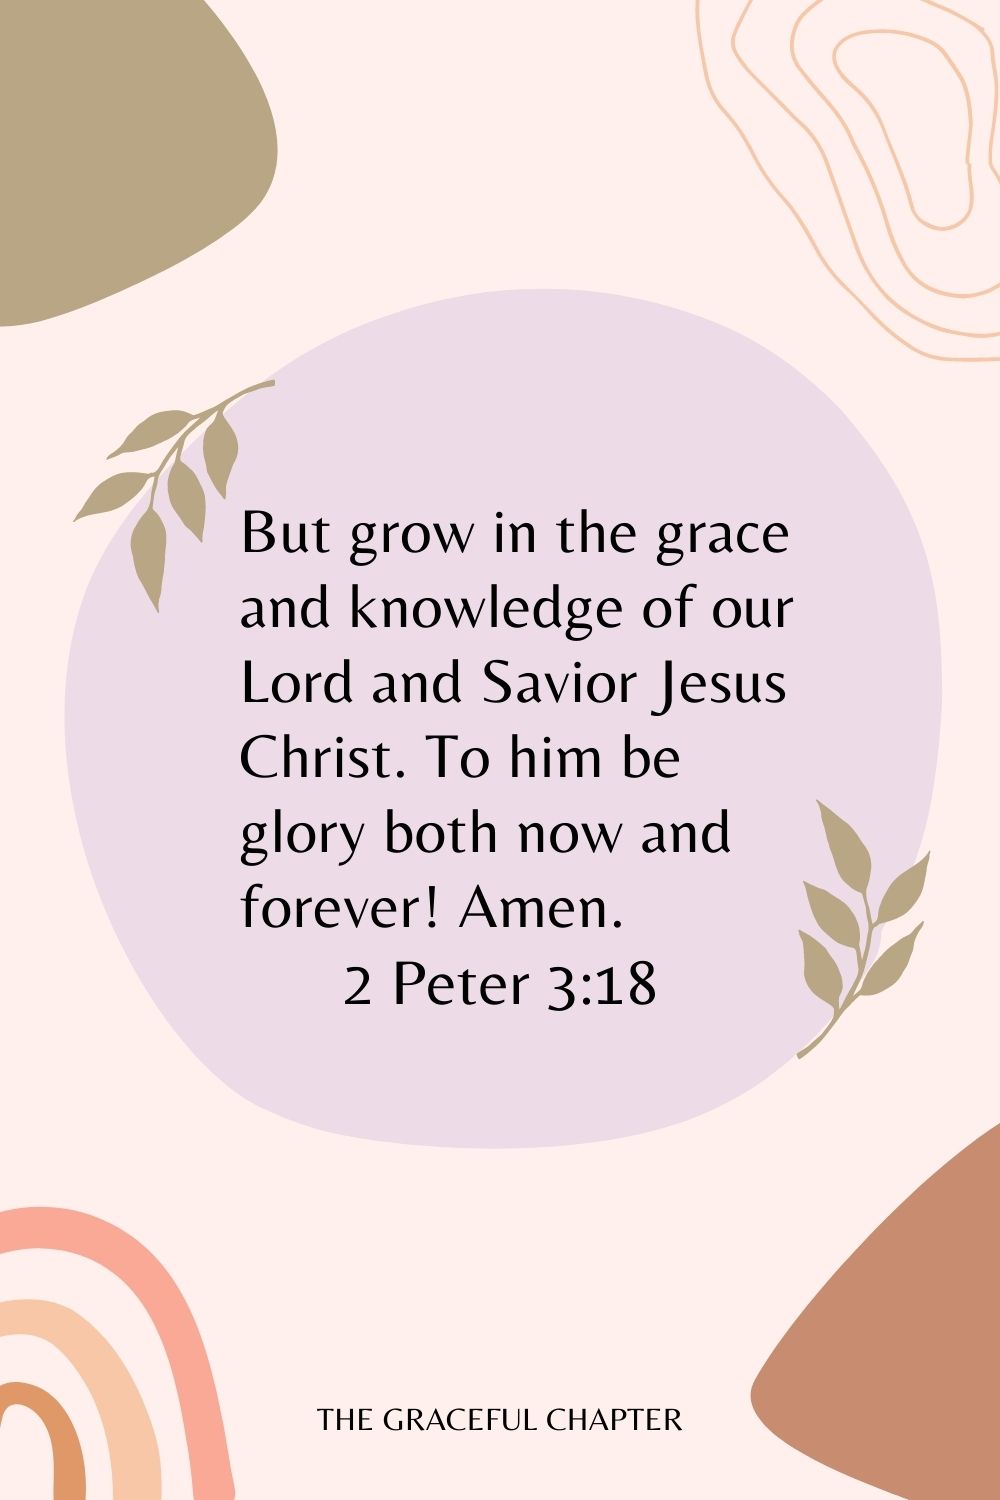 But grow in the grace and knowledge of our Lord and Savior Jesus Christ. To him be glory both now and forever! Amen. 2 Peter 3:18